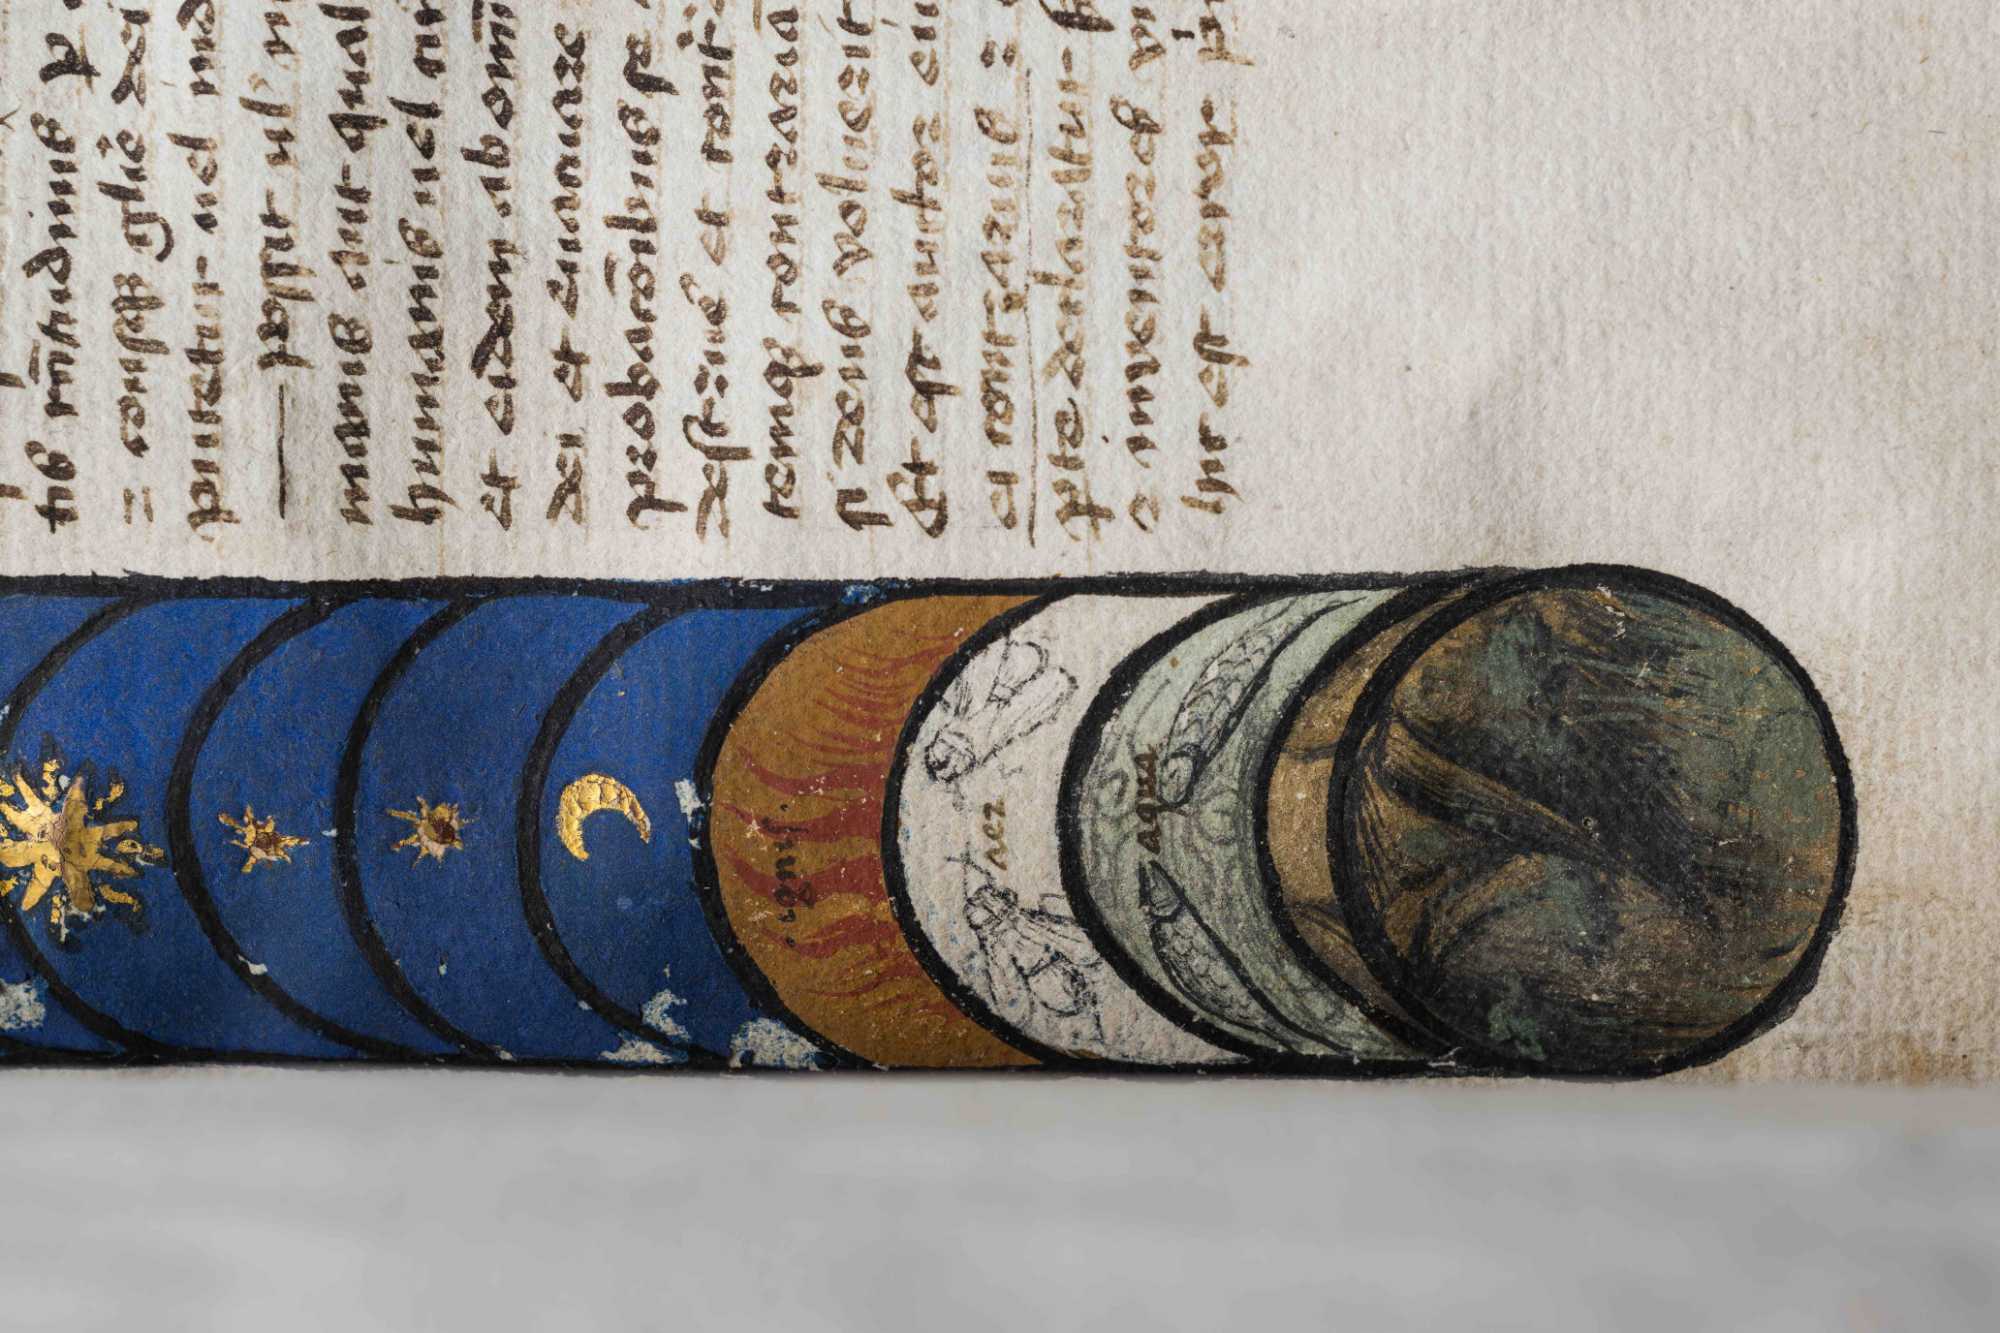 Close-up of the illumination on the first page of the medieval text "De universo" depicting the elements of earth, water, wind, and fire.